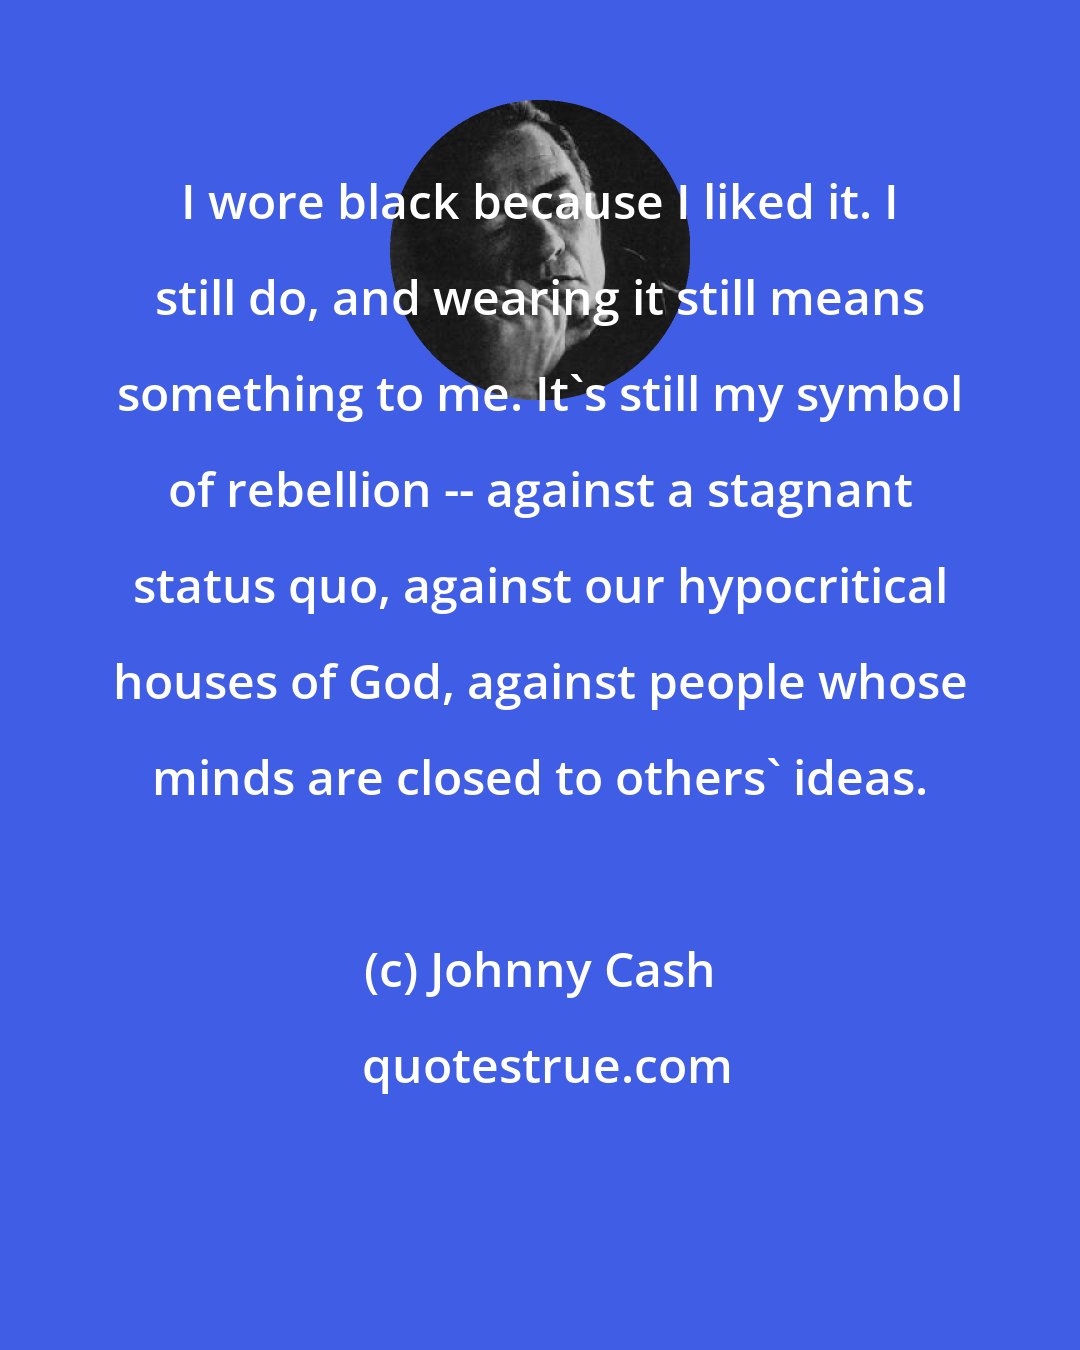 Johnny Cash: I wore black because I liked it. I still do, and wearing it still means something to me. It's still my symbol of rebellion -- against a stagnant status quo, against our hypocritical houses of God, against people whose minds are closed to others' ideas.